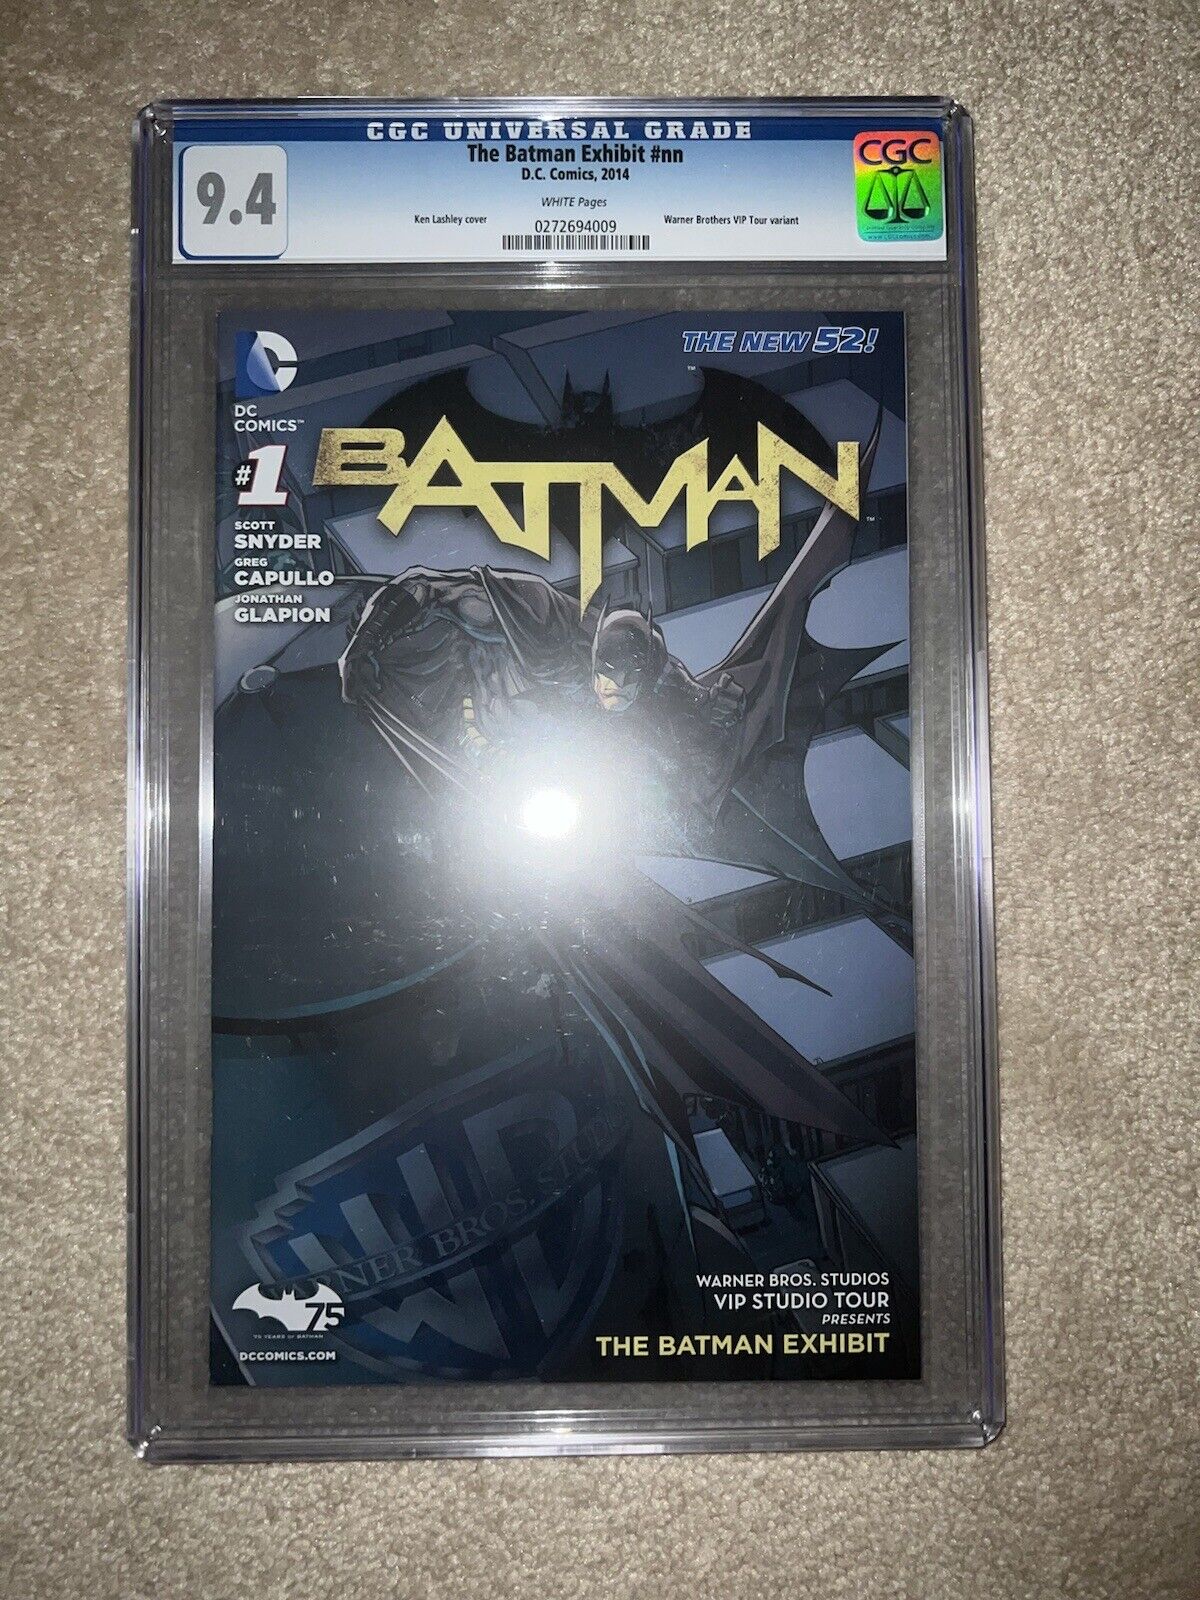 The Batman Exhibit #nn Warner Brothers VIP Tour Promo Limited to 1000 CGC 9.4